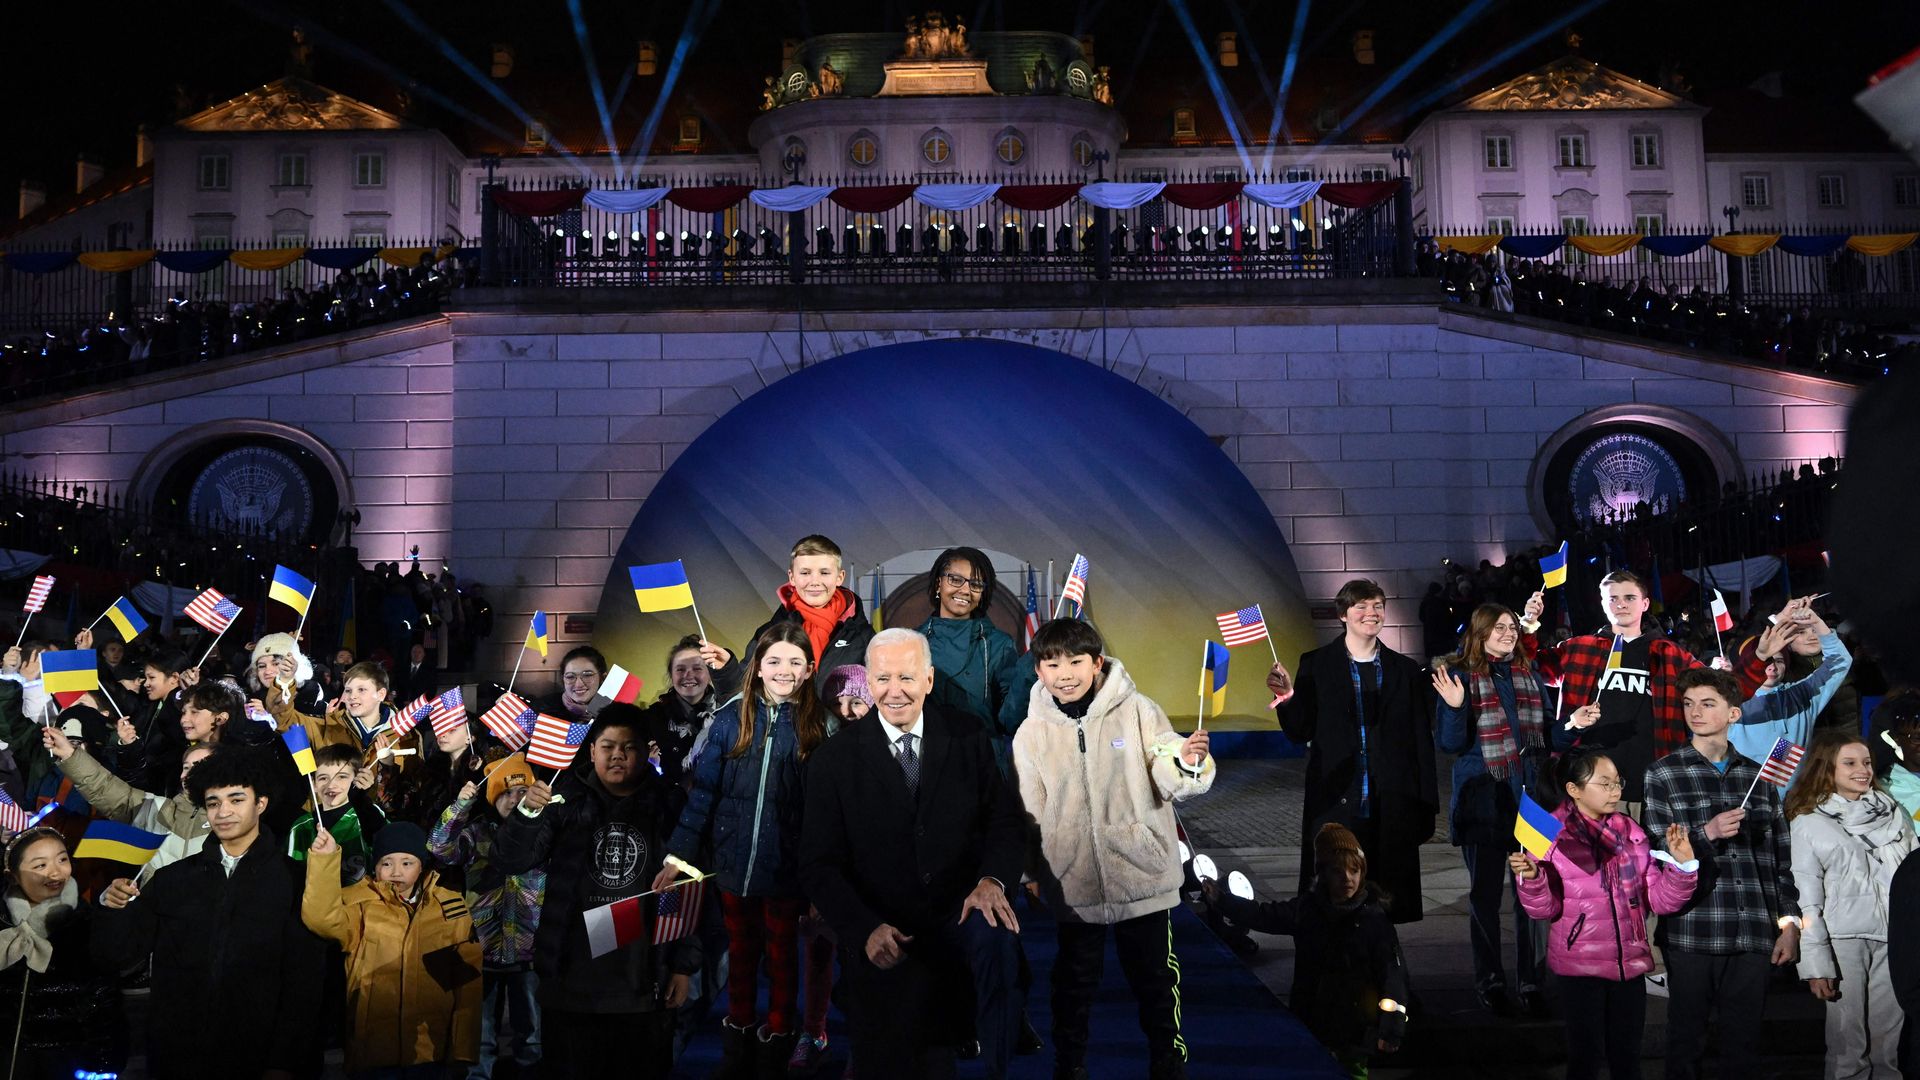 Biden poses with children after delivering a speech at the Royal Warsaw Castle Gardens in Warsaw, Poland. Photo: Mandel Ngan/AFP via Getty Images